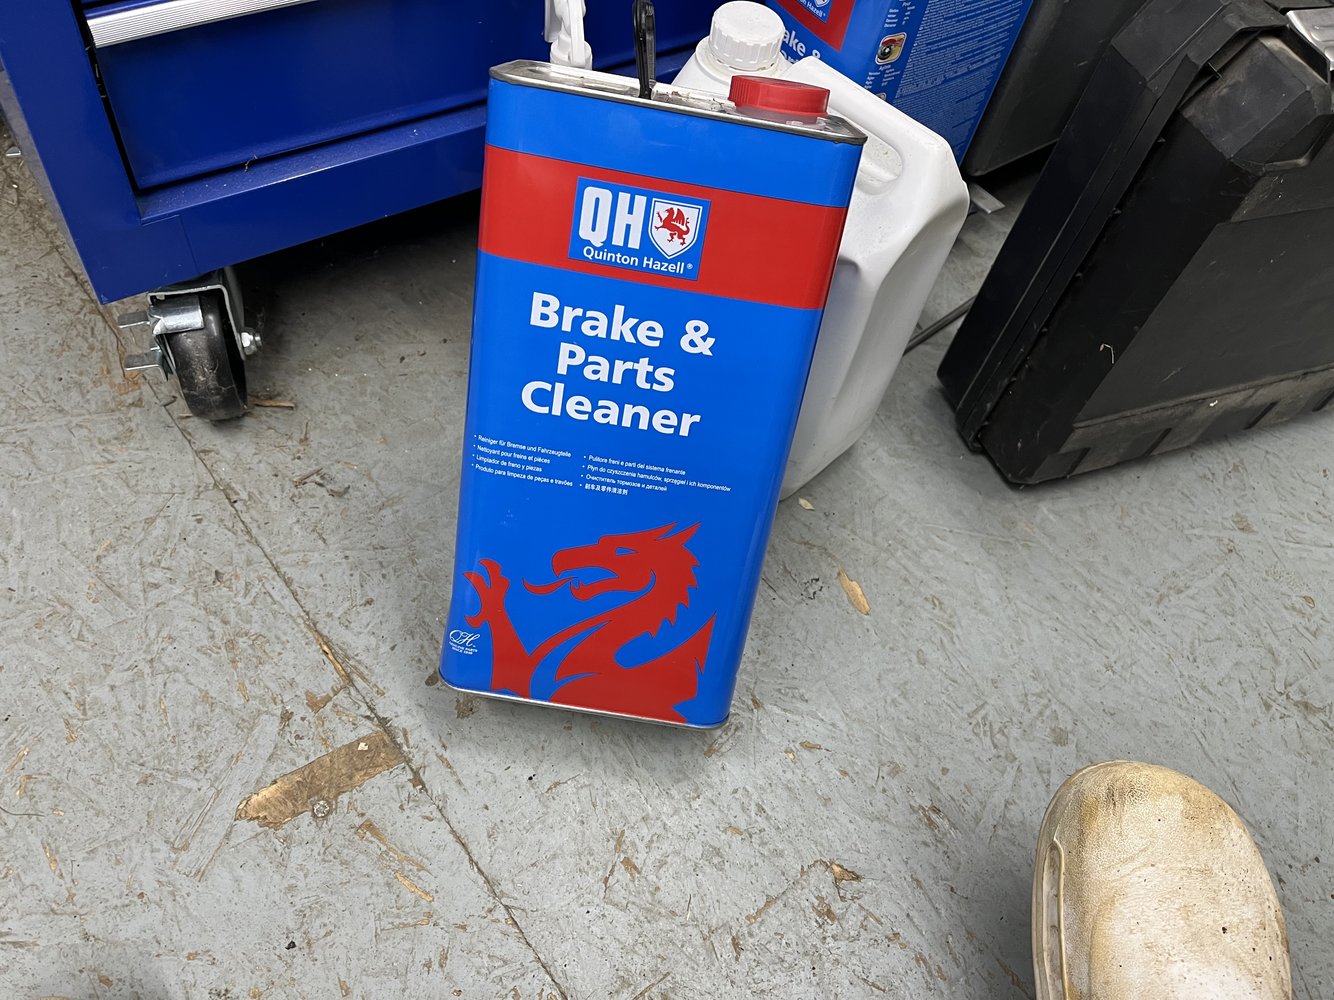 Brake-And-Parts-Cleaner.JPG